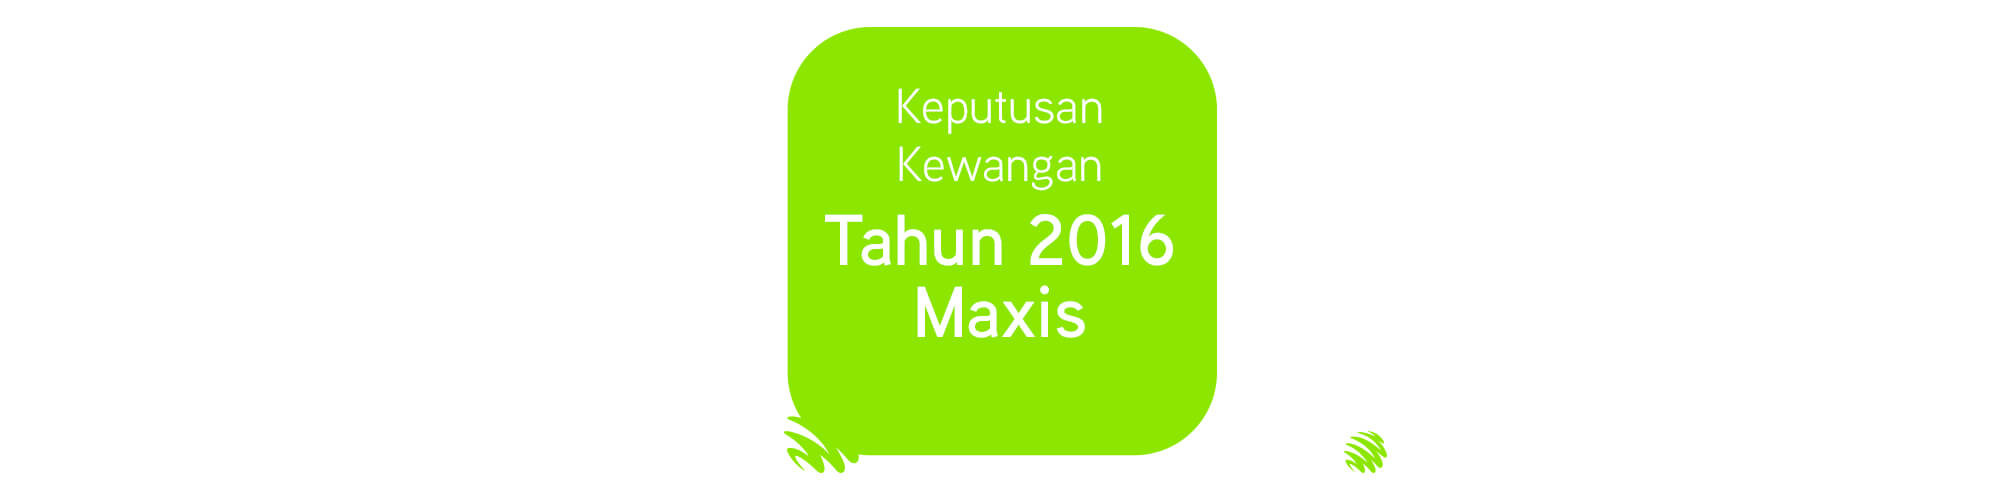 maxis 20016  financial result